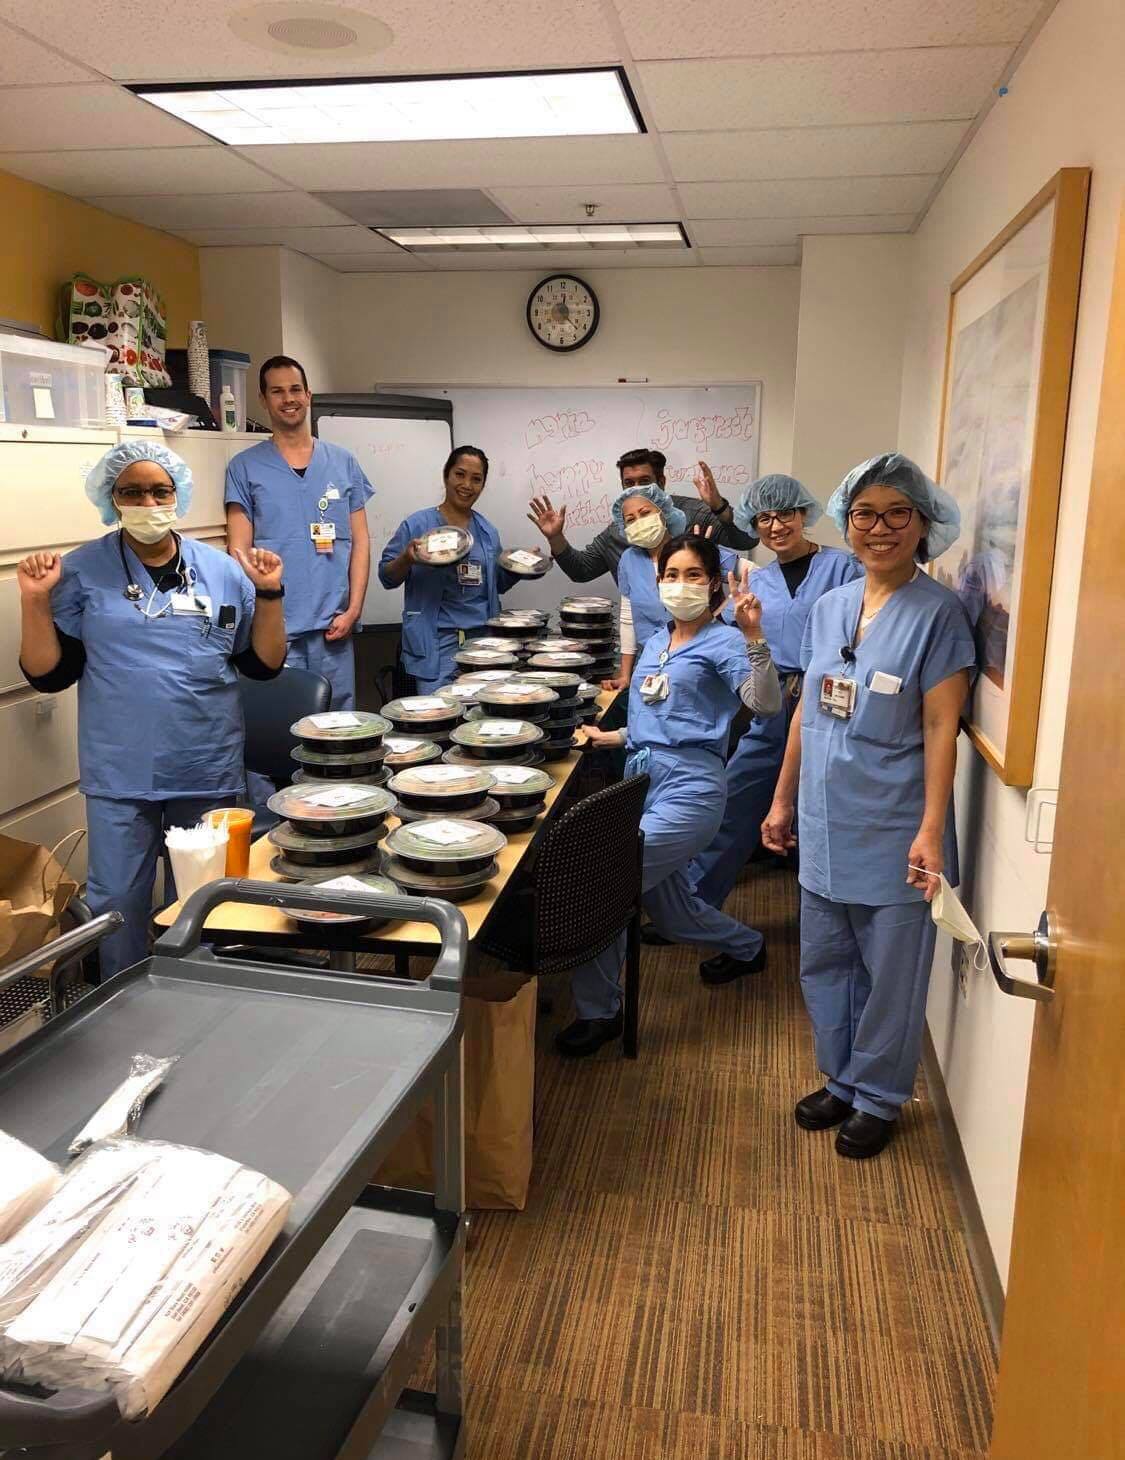 Medical staff of Kaiser Hospital are seen in a photo with Vietnamese lunch boxes on April 2, 2020.